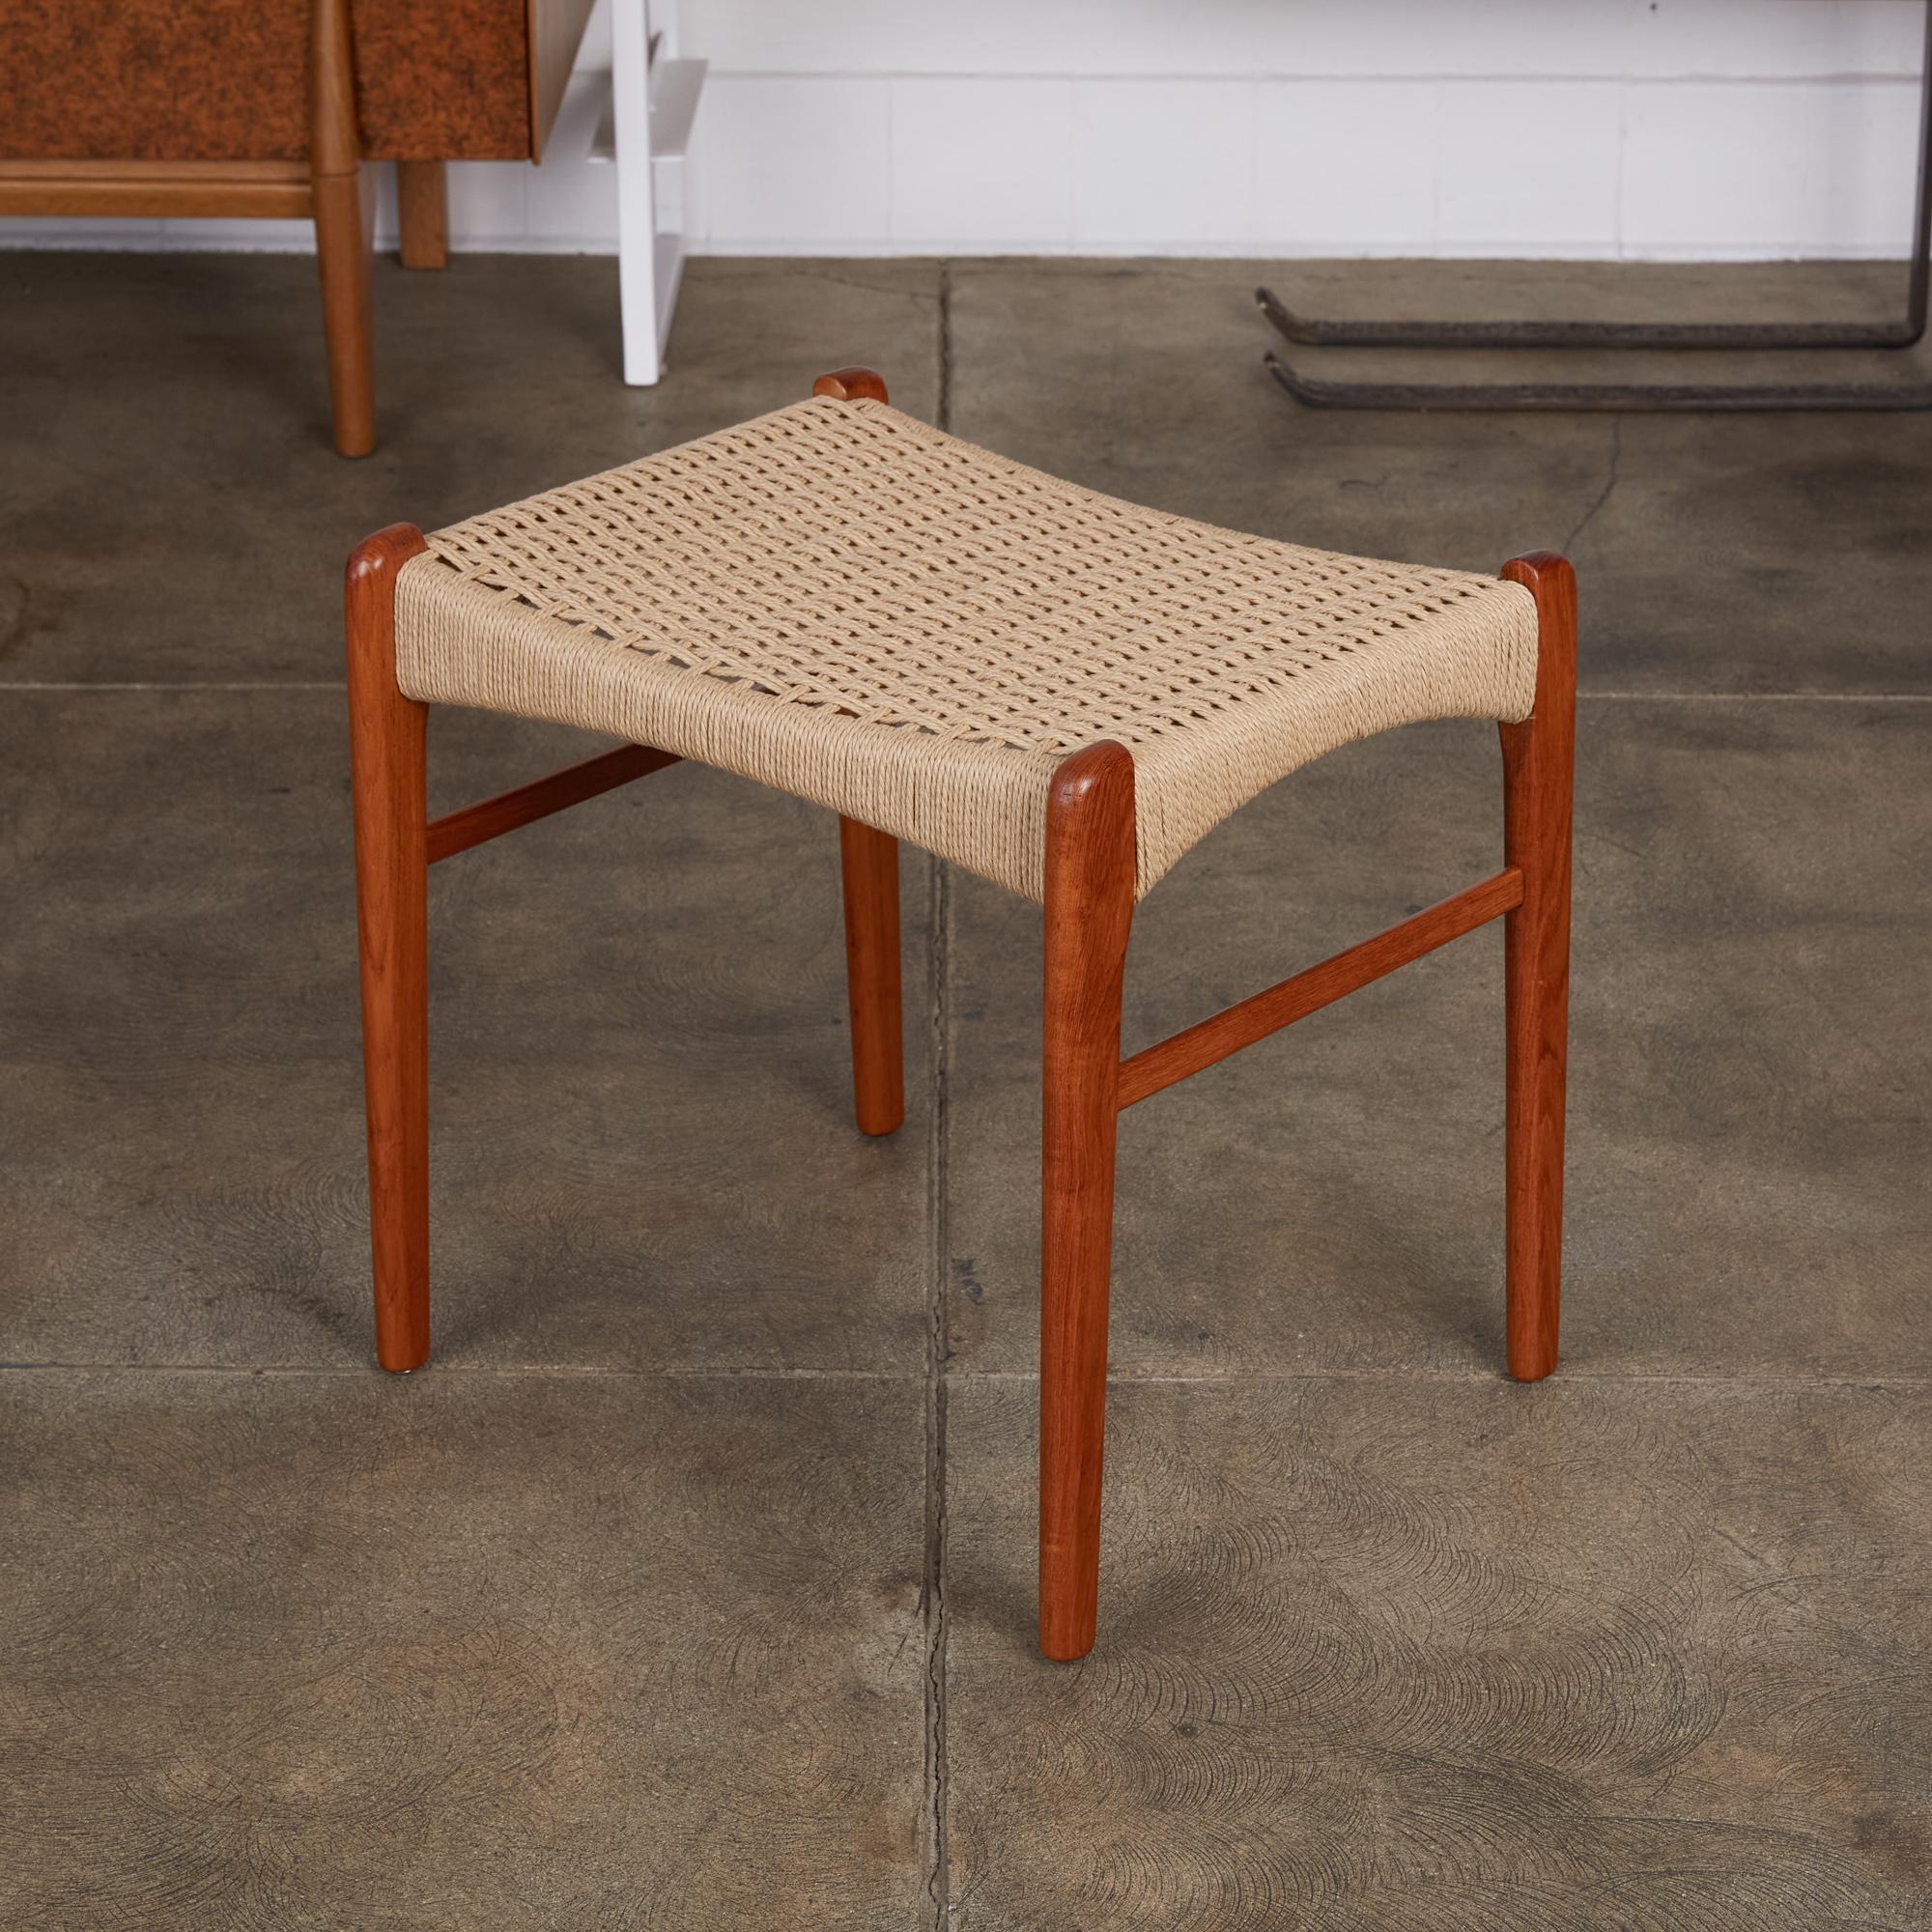 Teak stool by Peder Kristensen for Glyngøre Stolefabrick, Denmark, circa 1950s. This stool or ottoman features an oiled teak frame with teak stretchers, and a newly woven Danish cord seat according to original design. This Minimalist stool is